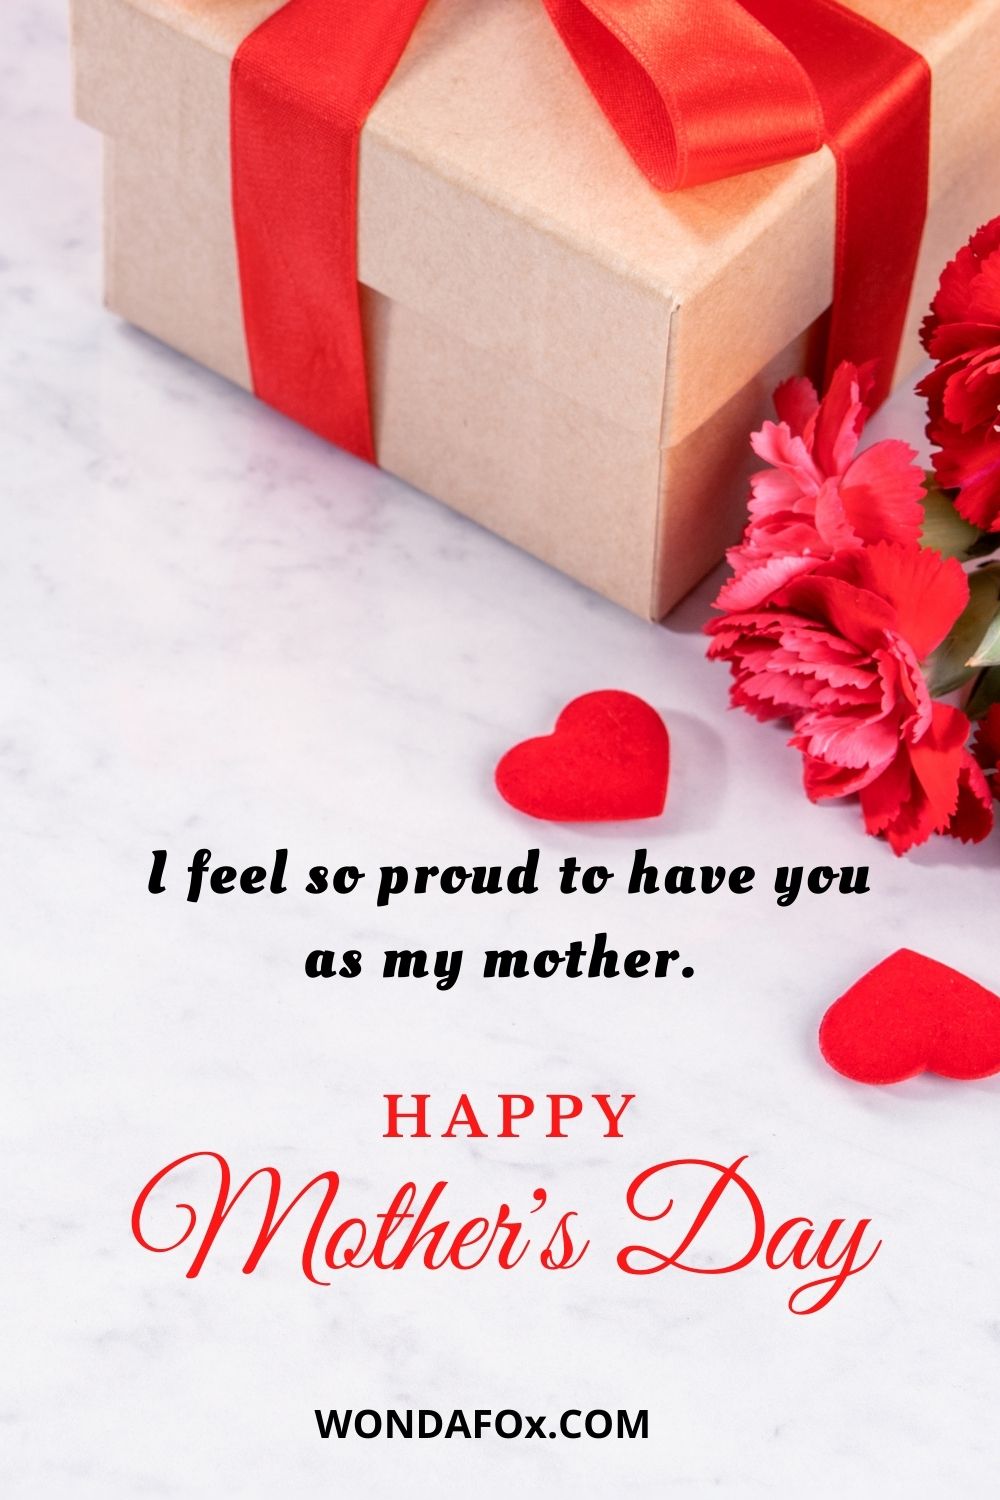 I feel so proud to have you as my mother. Happy Mother’s Day!